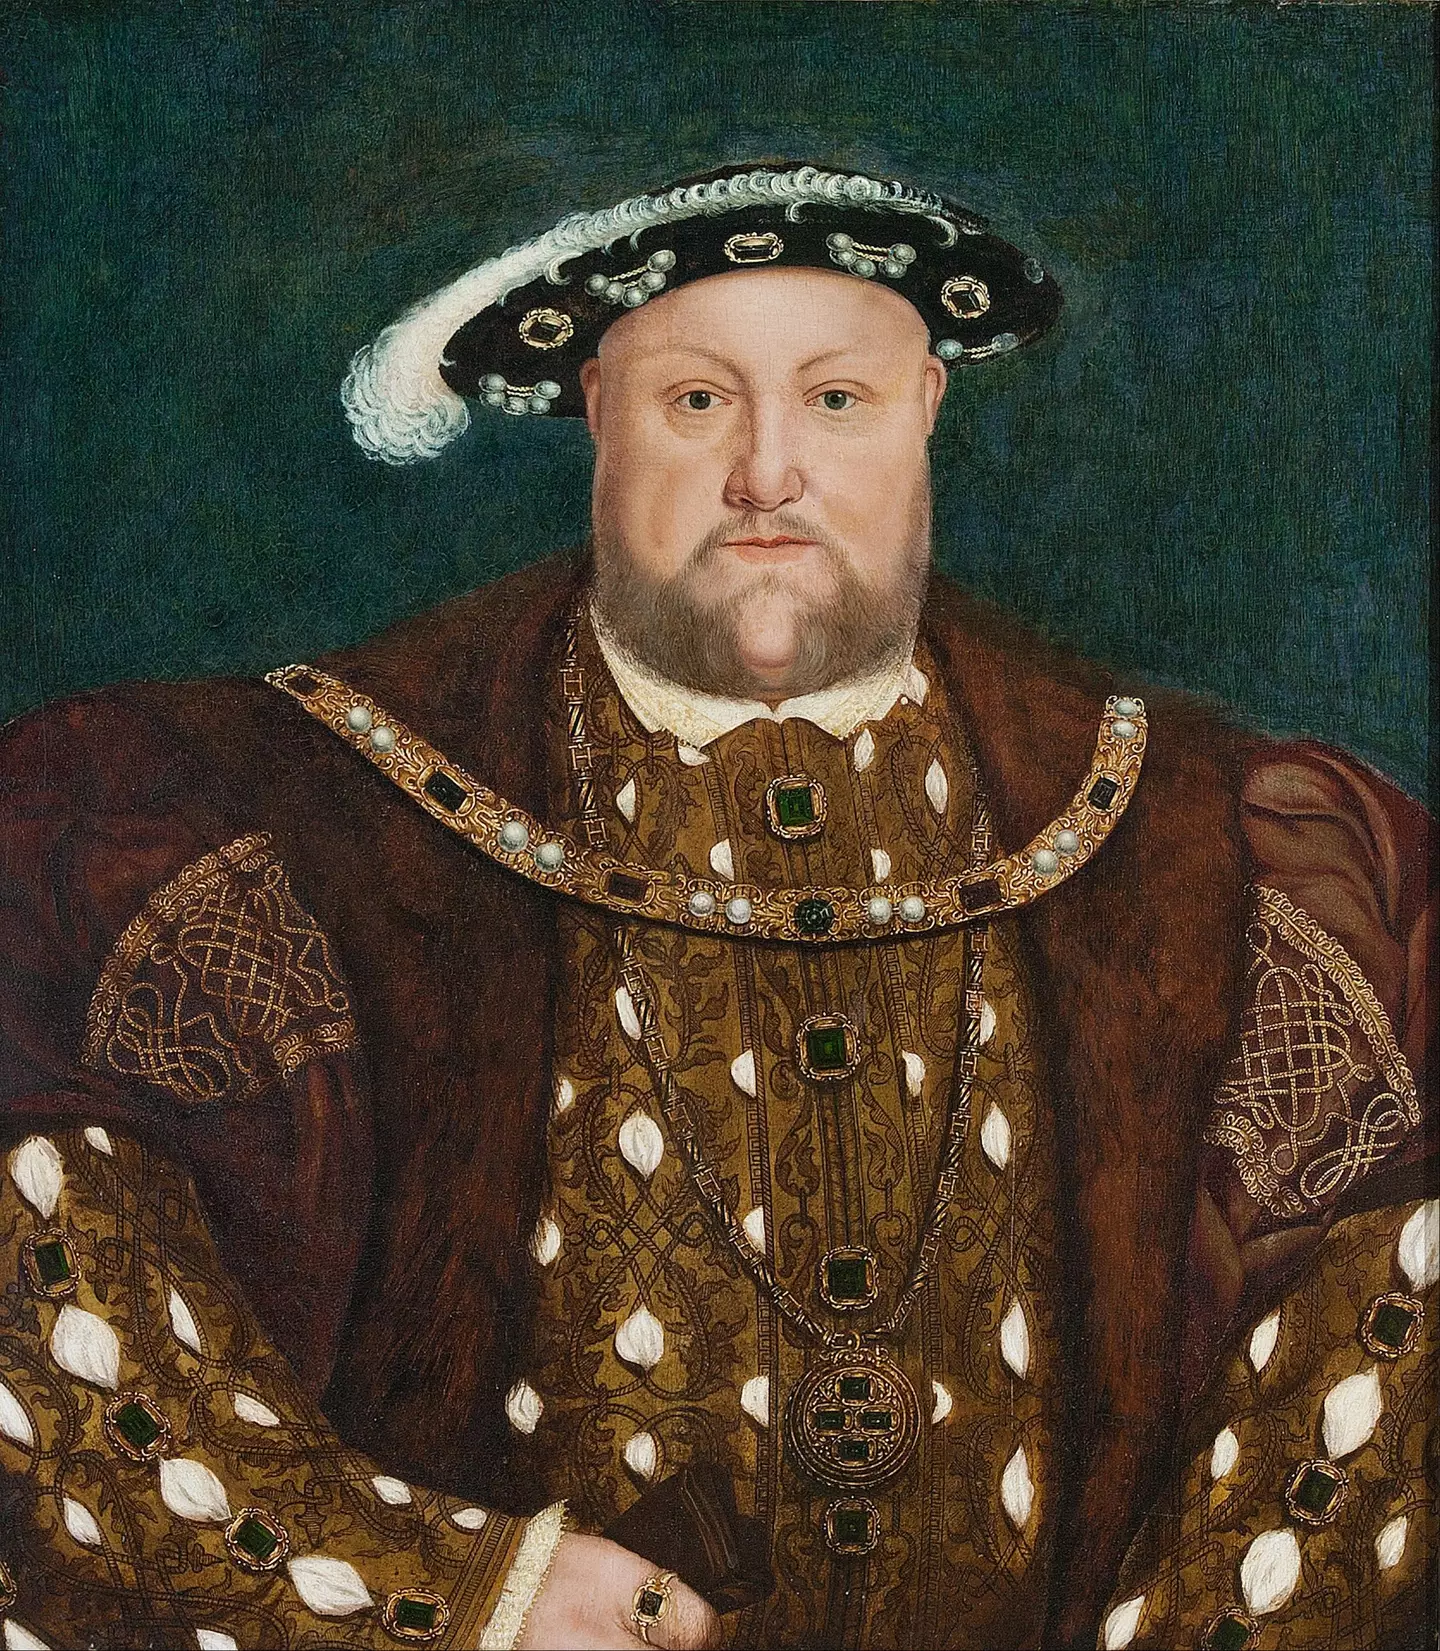 Henry VIII in his later years, with a reputation for scoffing pies and chopping wives.